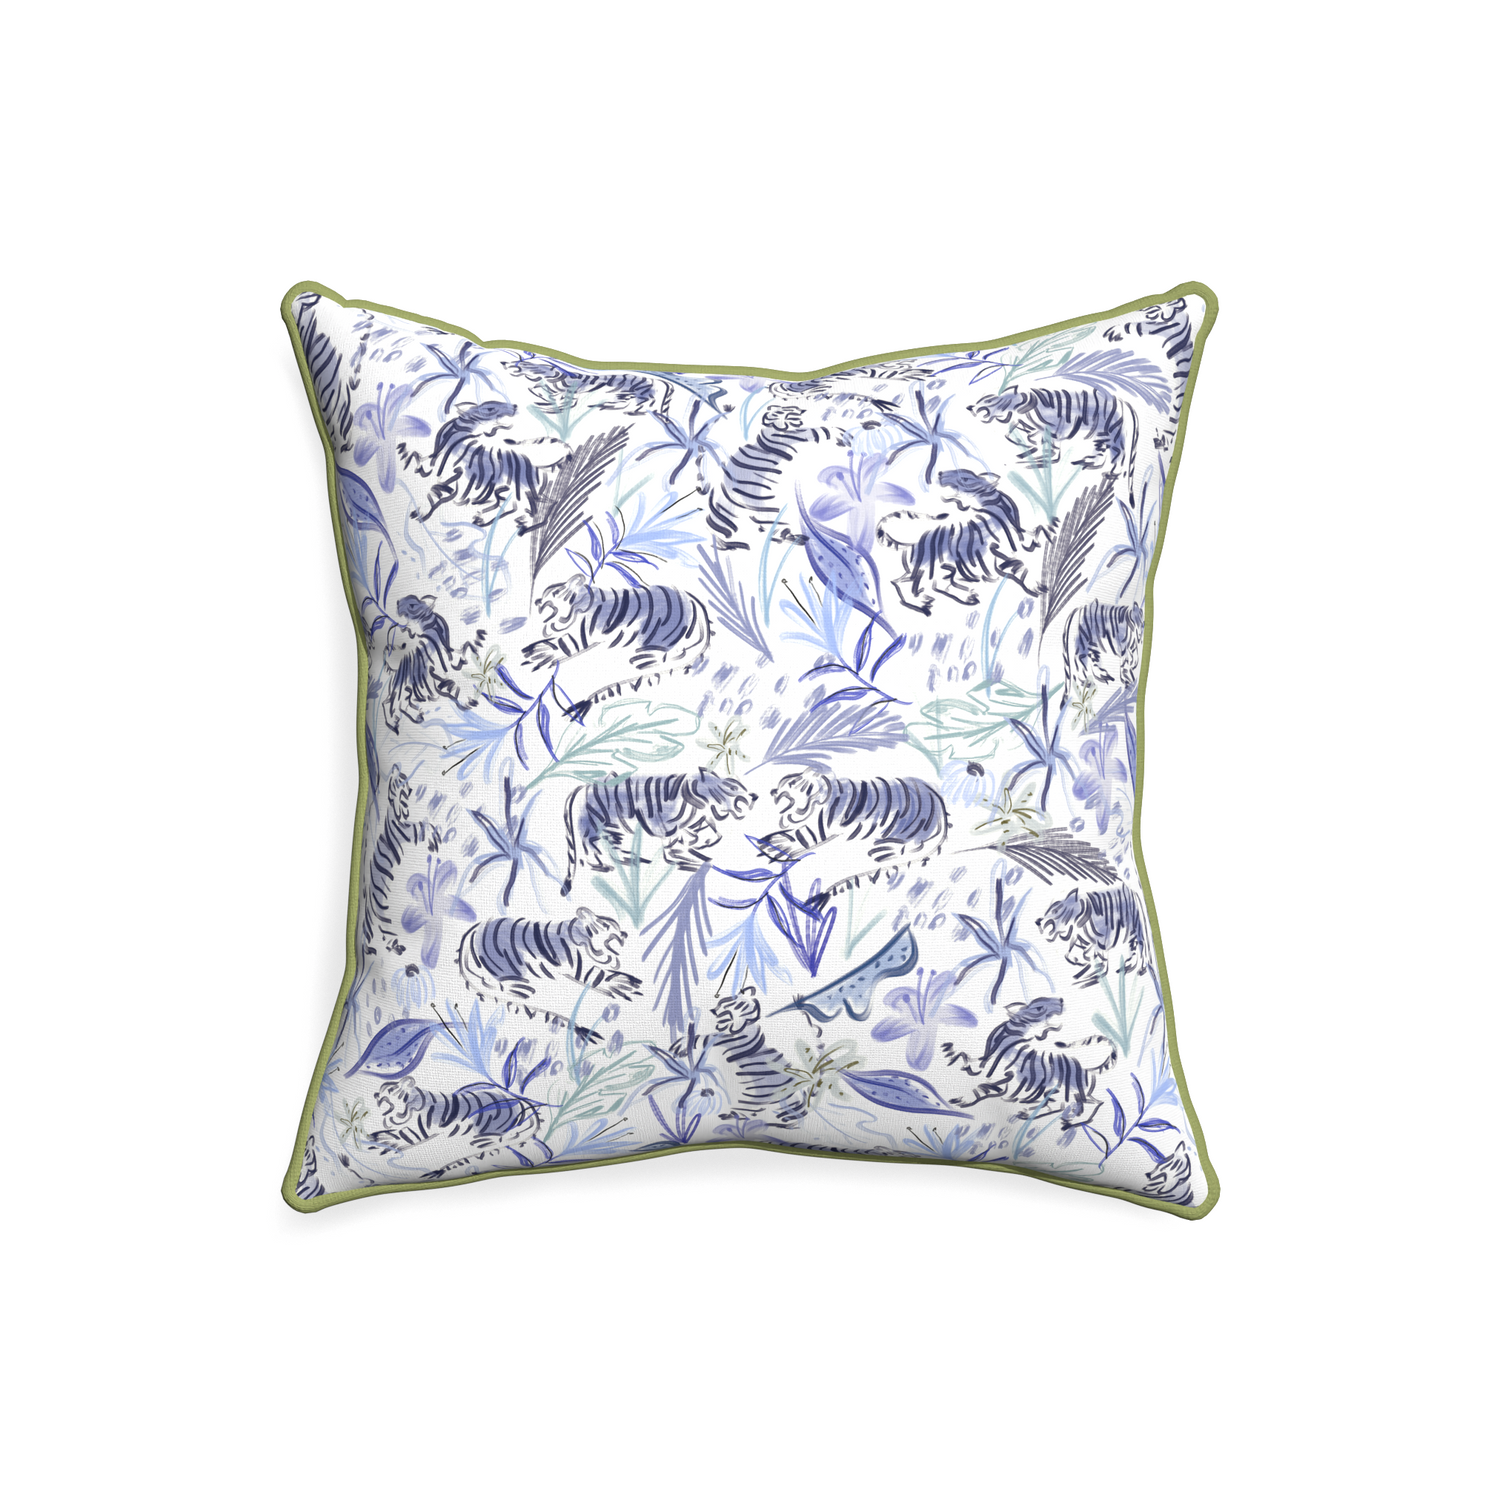 20-square frida blue custom blue with intricate tiger designpillow with moss piping on white background